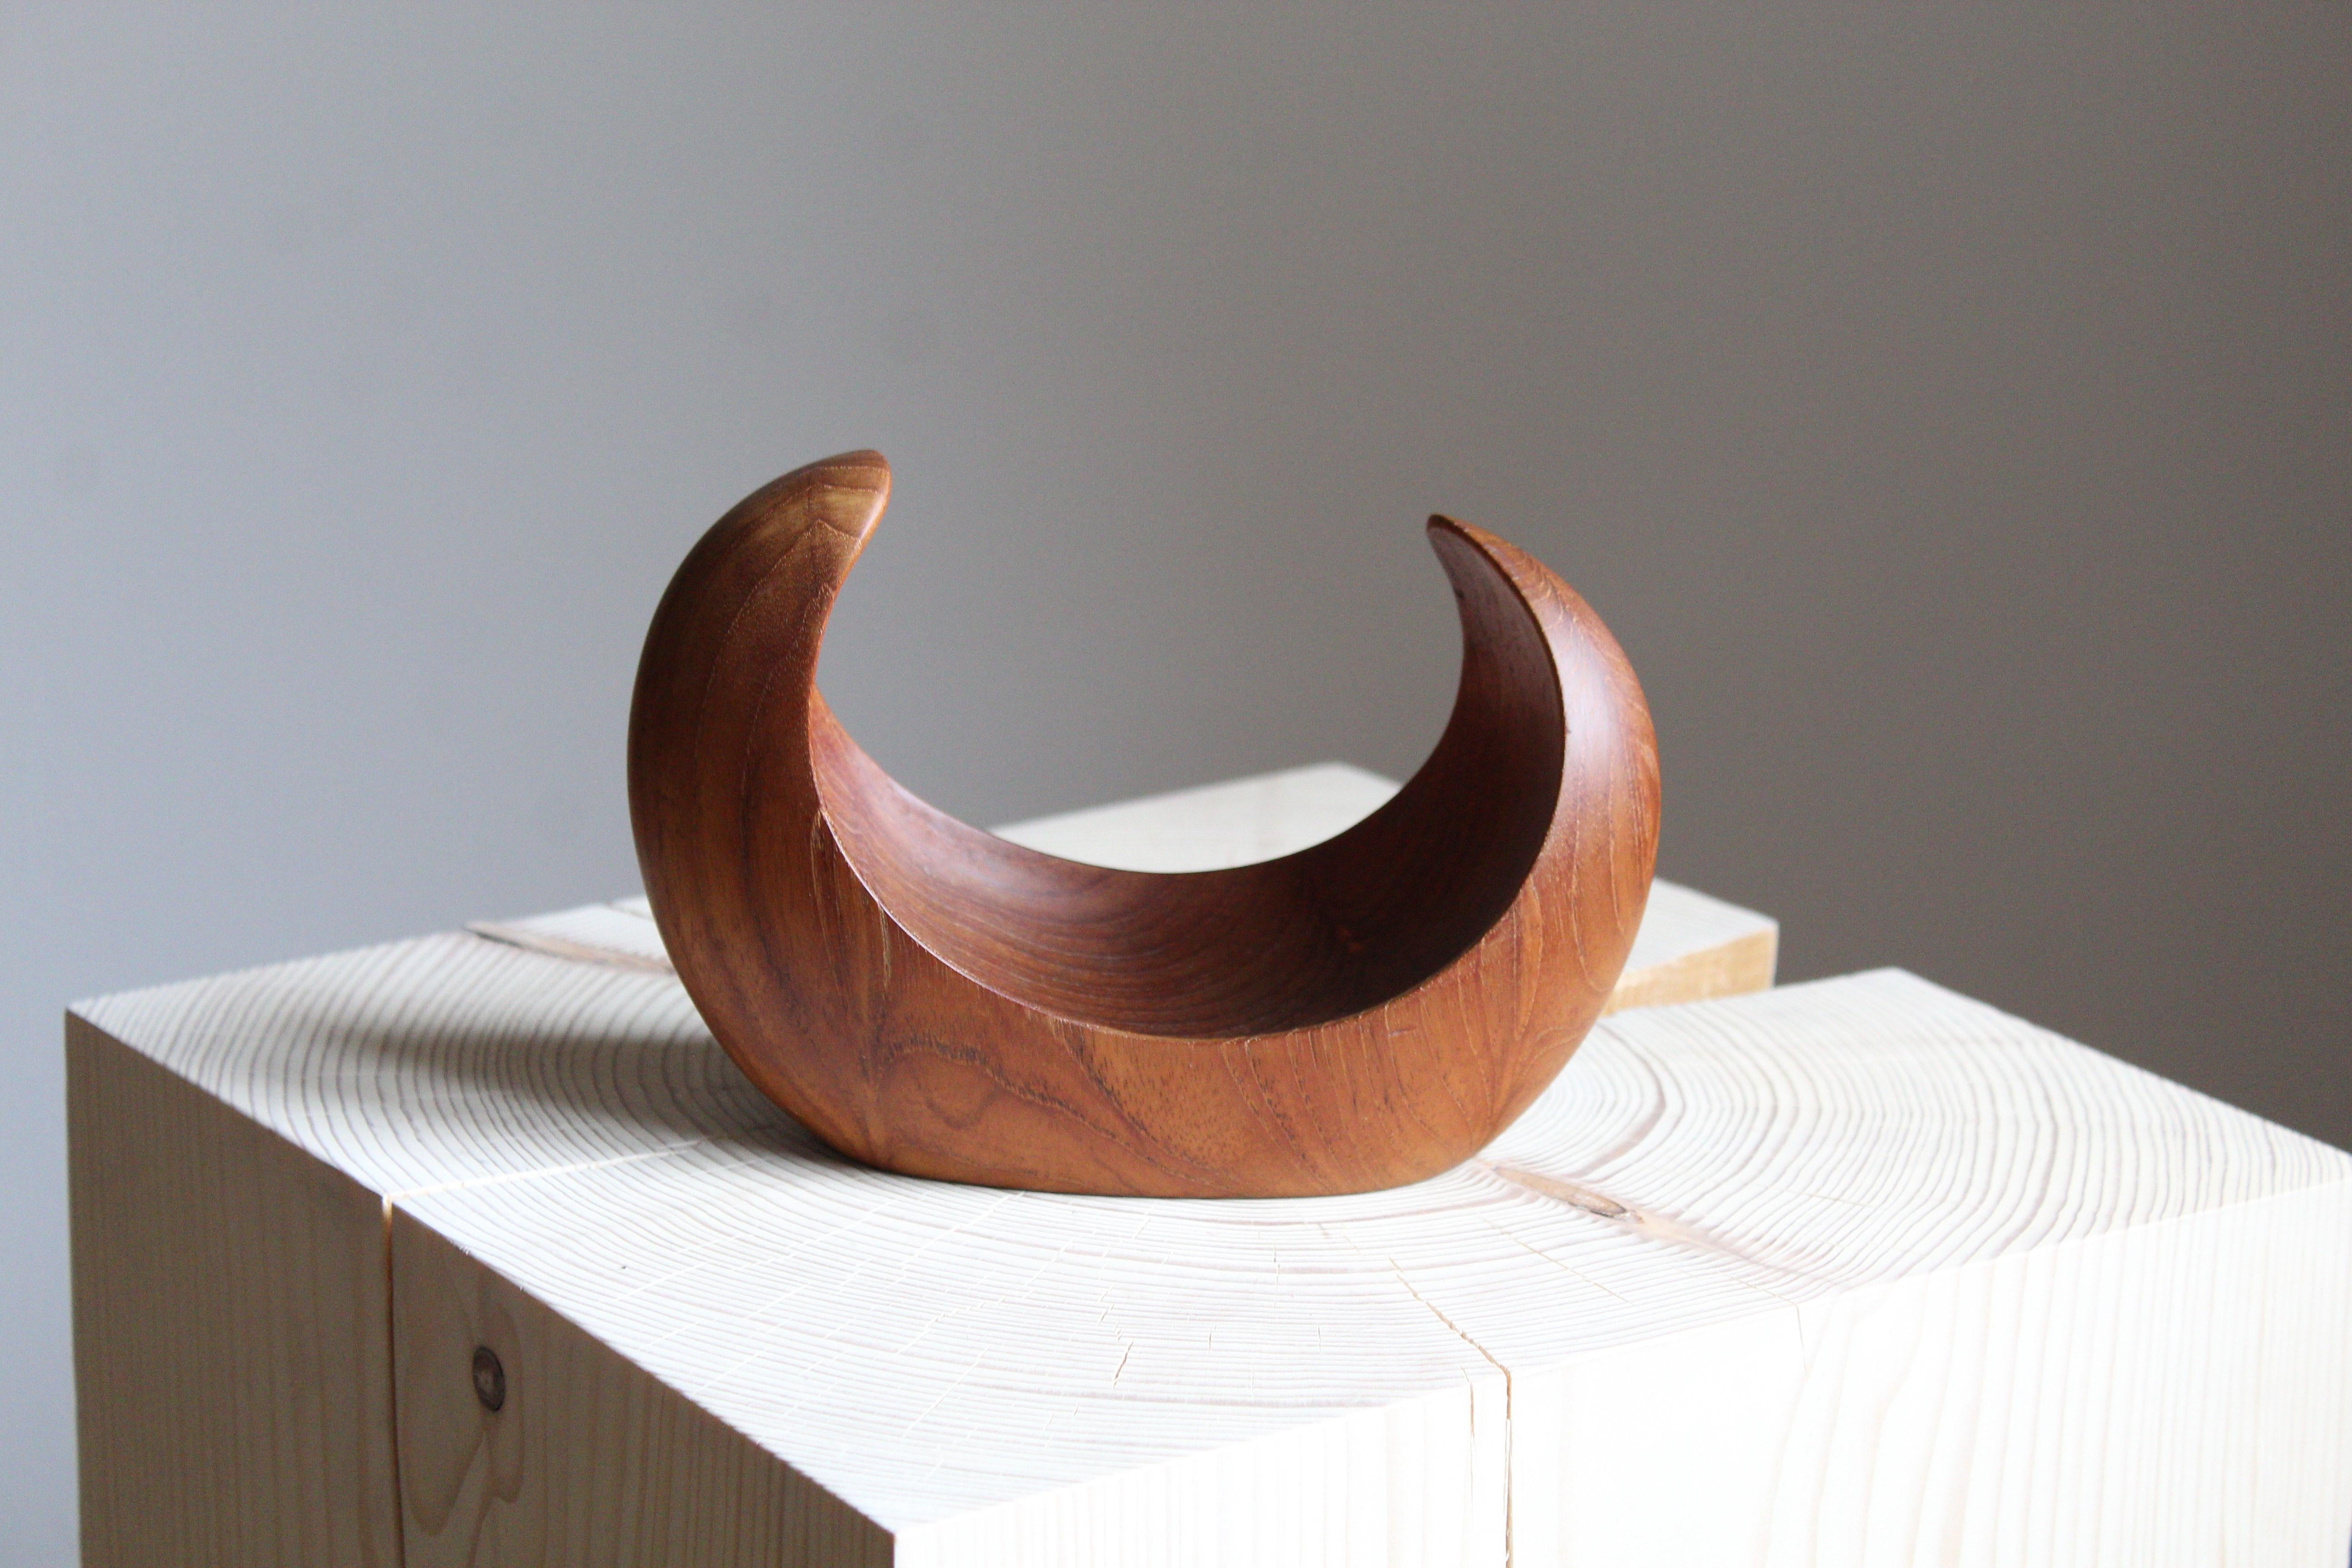 A small sculptural bowl, designed and produced in Sweden, 1950s. In solid teak. Signed. 

Other designers of the period include Stig Sandberg, Finn Juhl, Kay Boesen, Jens Quistgaard, and Peder Moos.